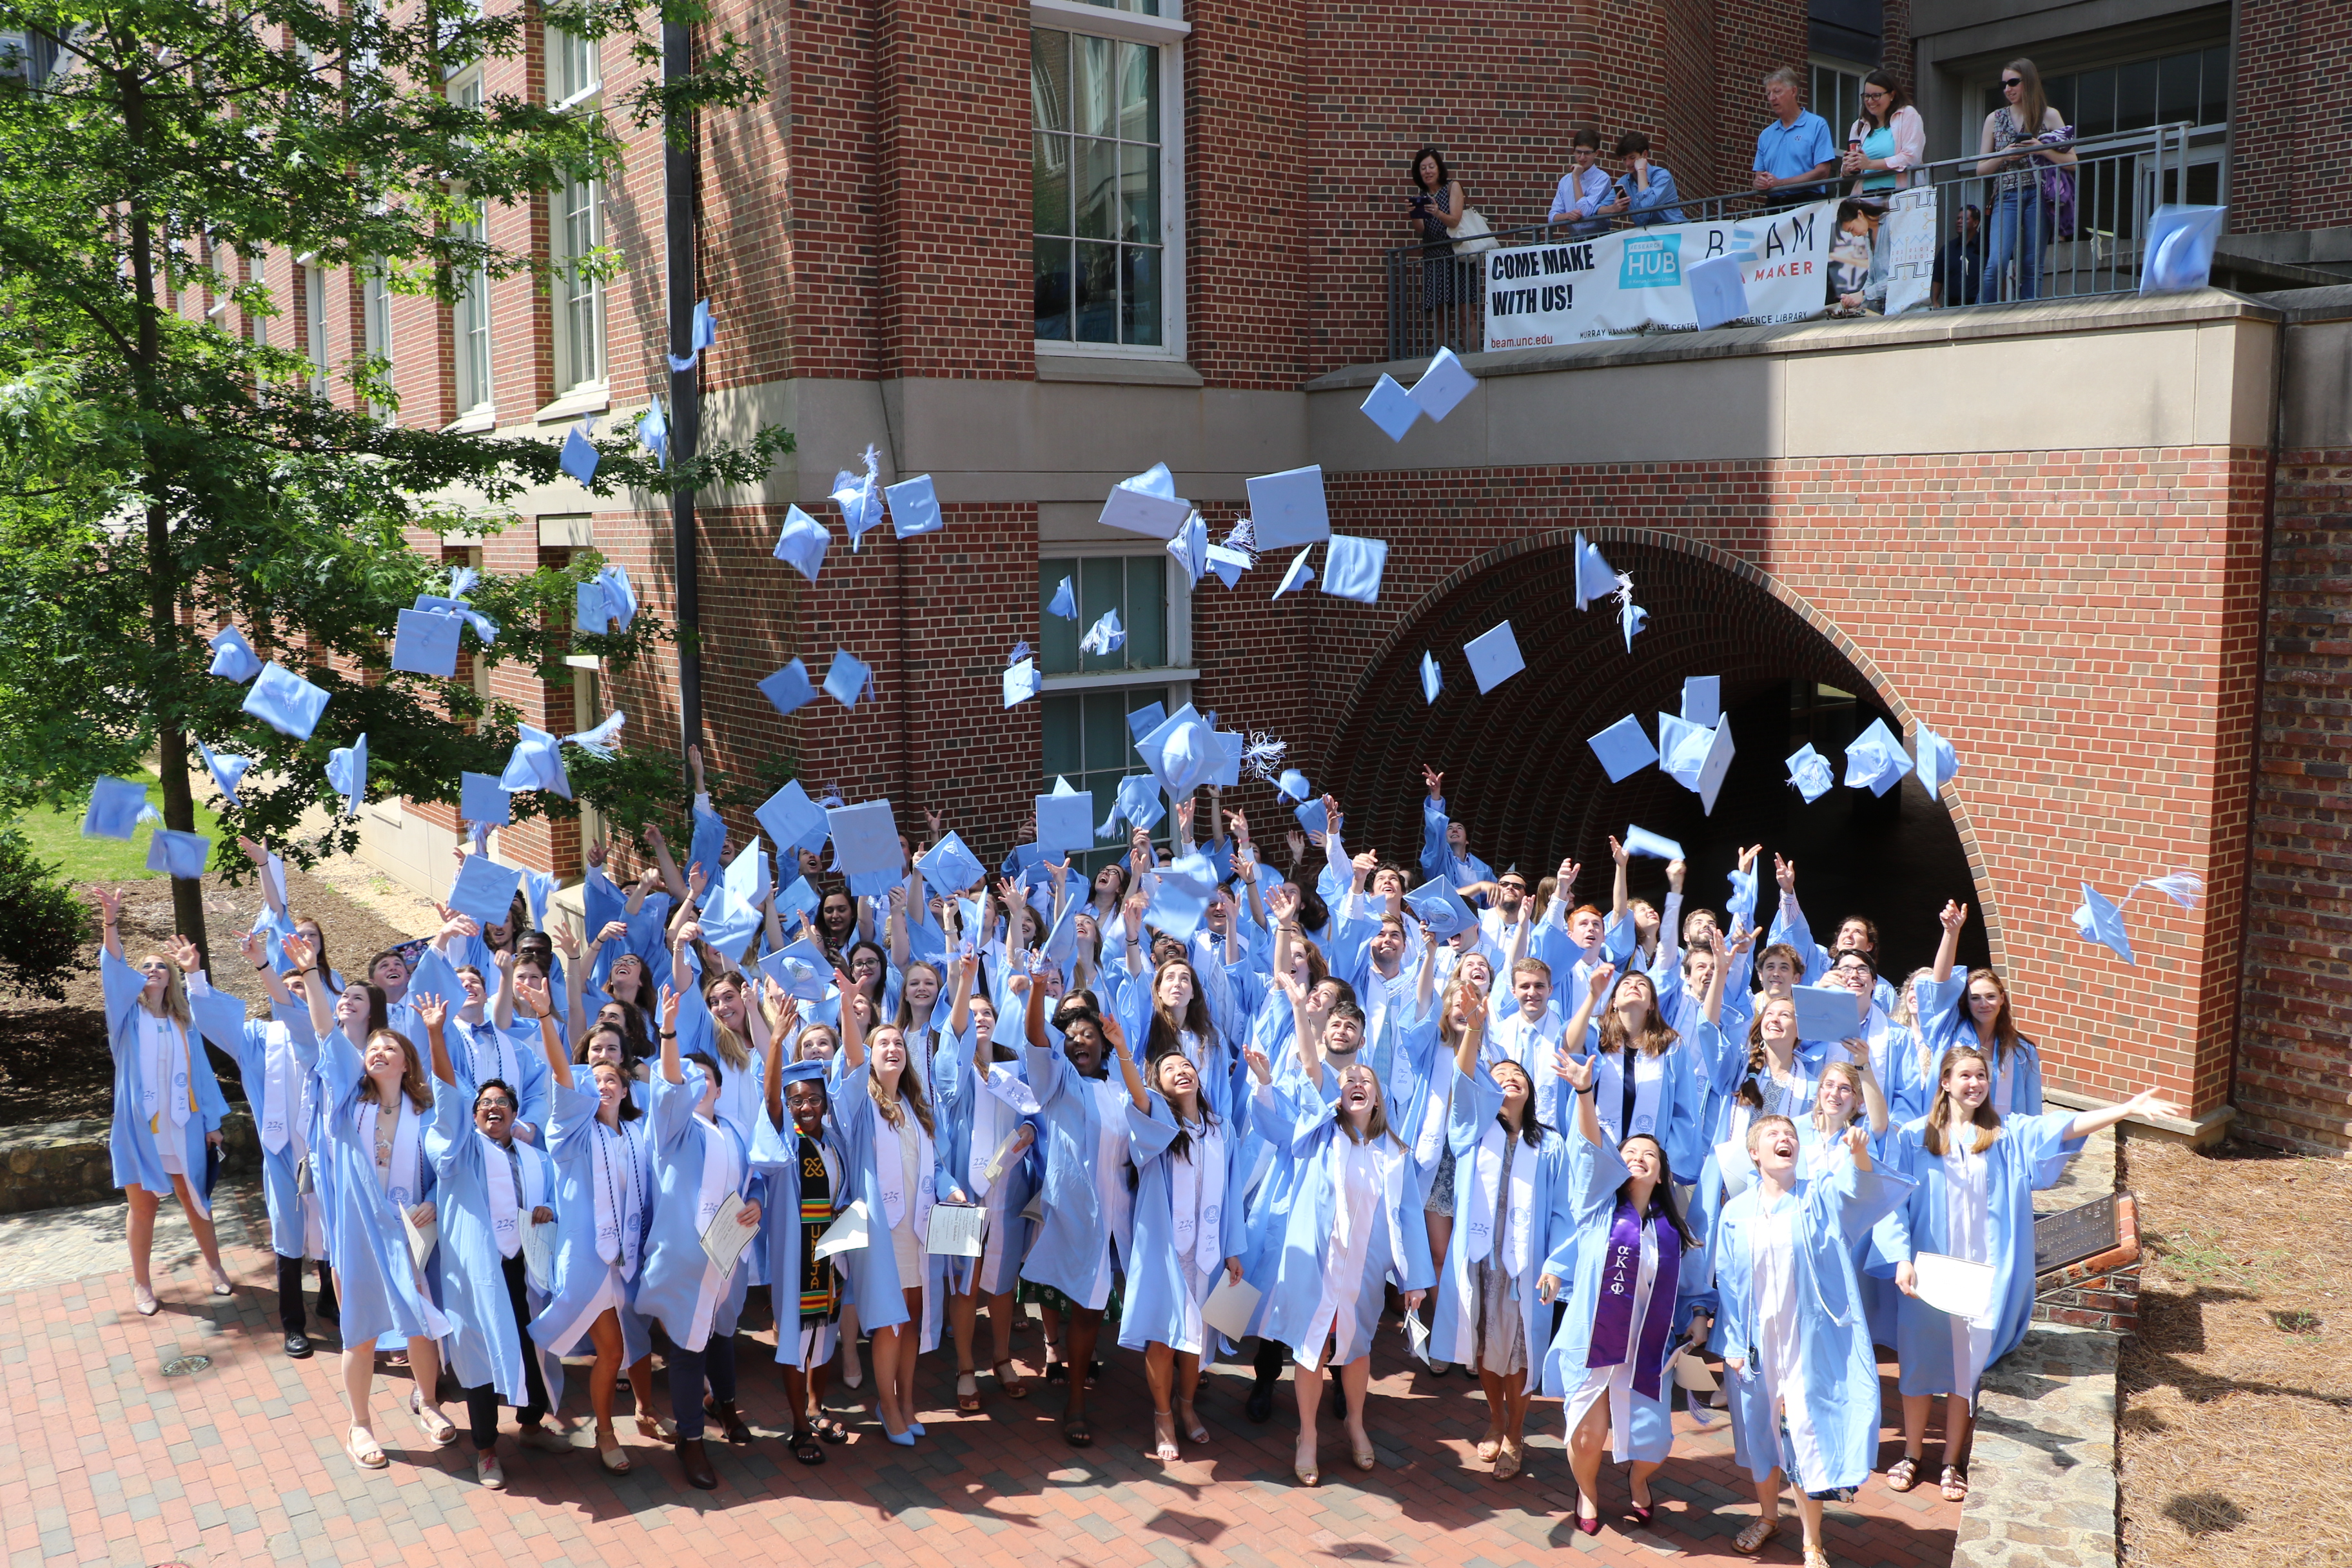 a group of students in Carolina blue caps and gowns throw their hats up in the air in front of Murray Hall on UNC's campus